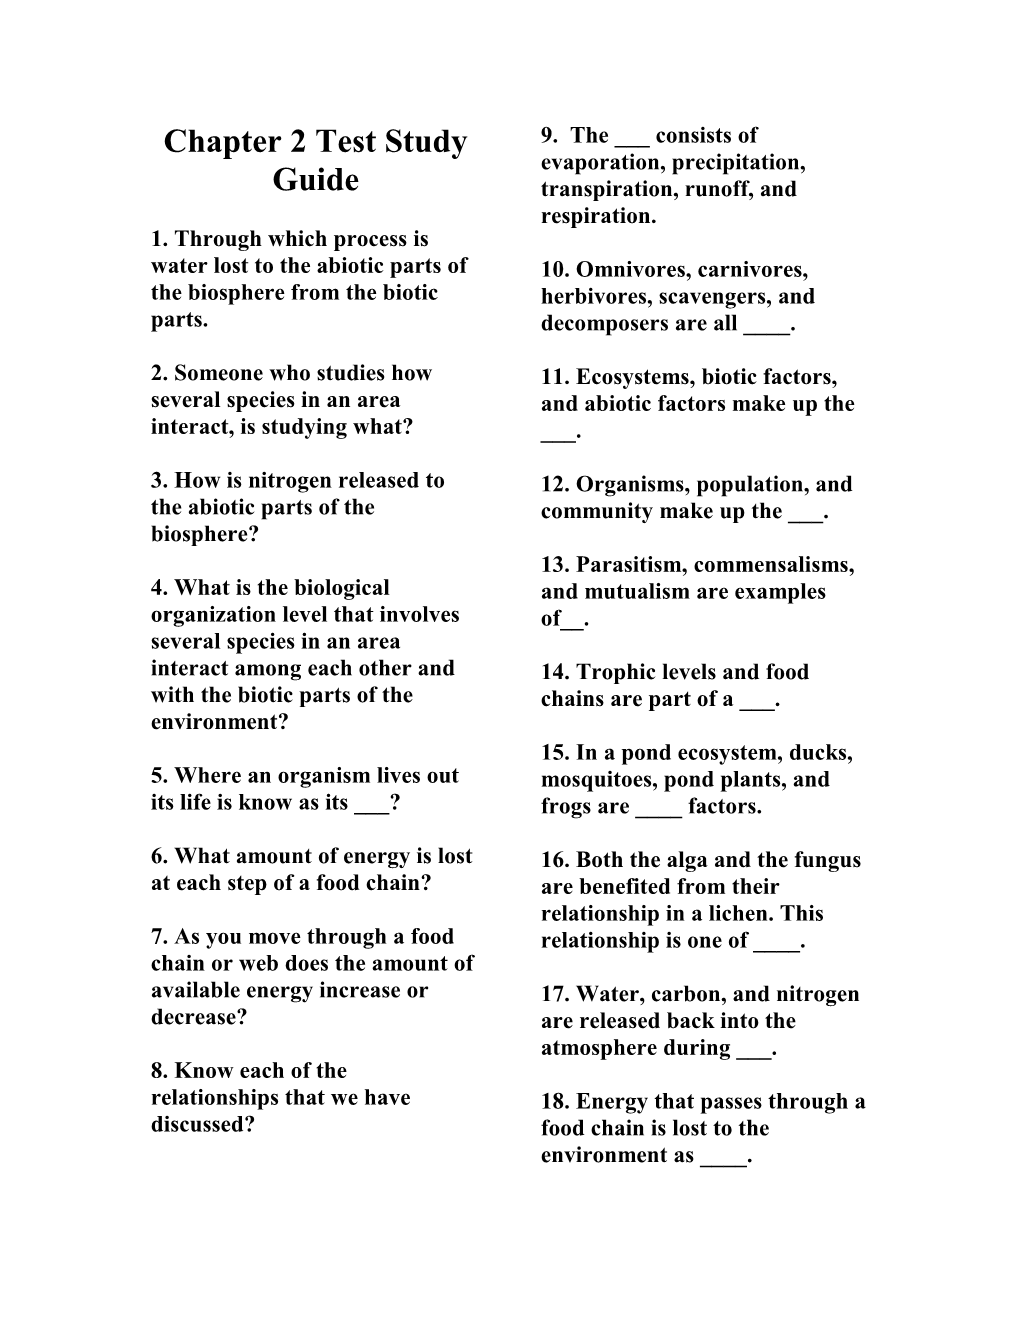 Chapter 2 Vocabulary Test Study Guide